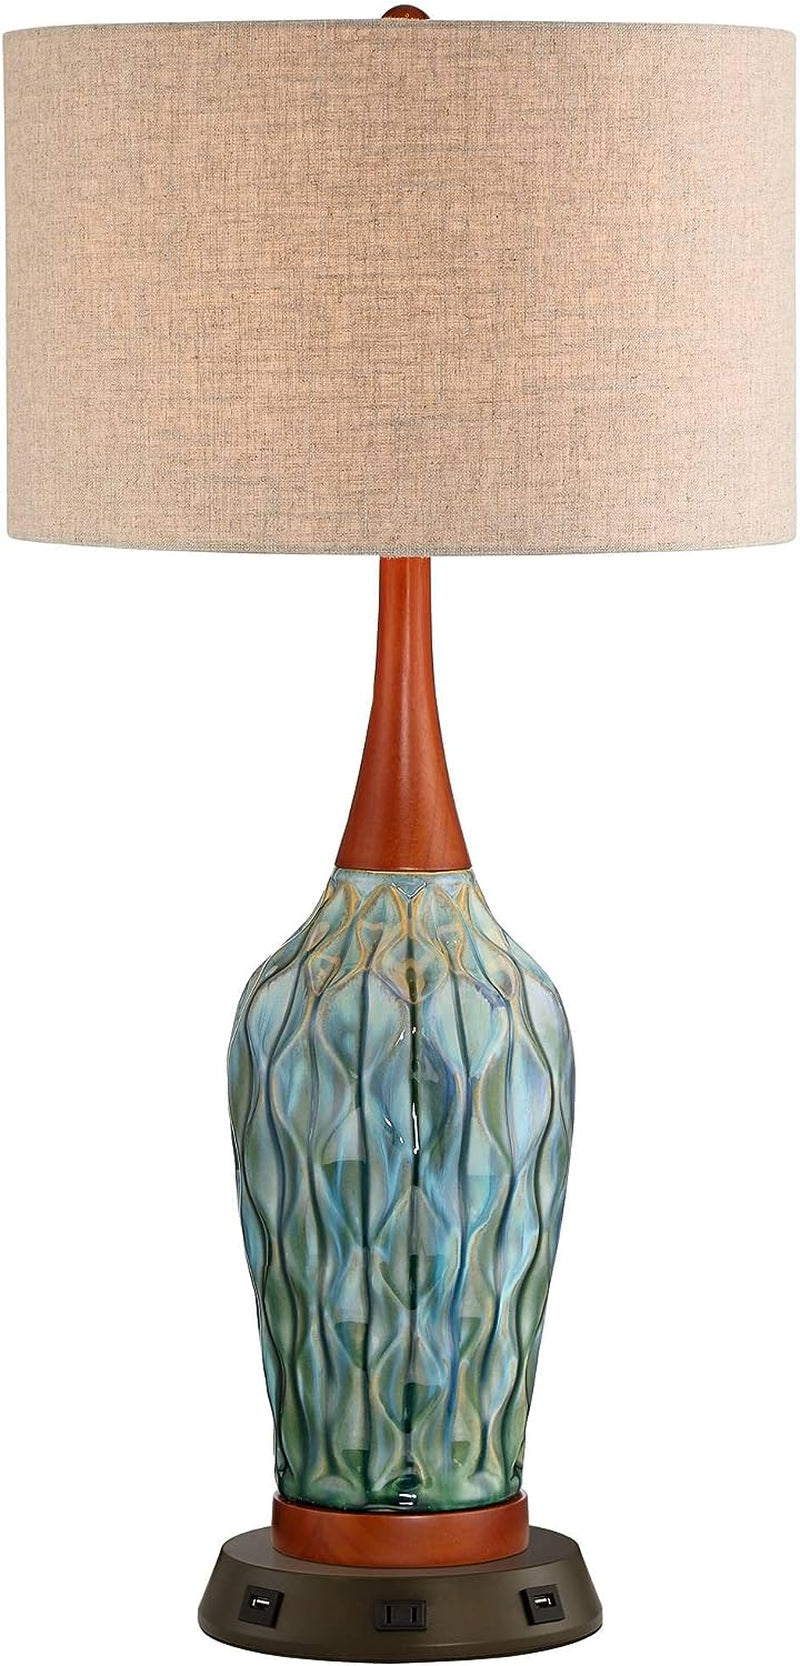 360 Lighting Rocco Mid Century Modern Table Lamp 30" Tall Ceramic Blue Teal Glaze Wood Handmade Linen Drum Shade Decor for Living Room Bedroom House Bedside Home Entryway (Colors May Vary)